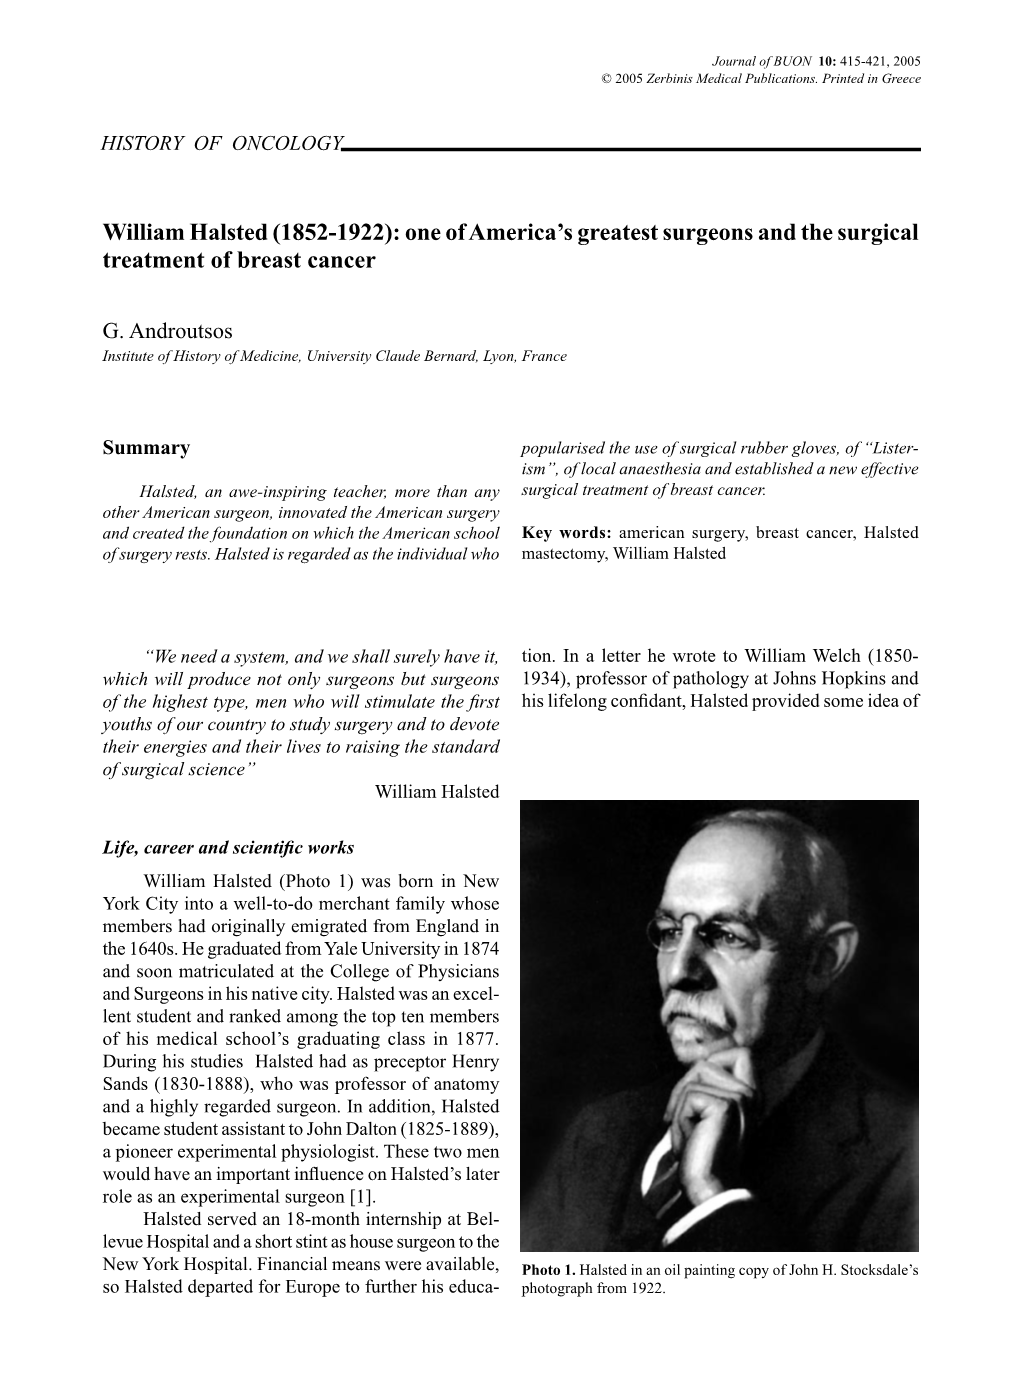 William Halsted (1852-1922): One of America’S Greatest Surgeons and the Surgical Treatment of Breast Cancer